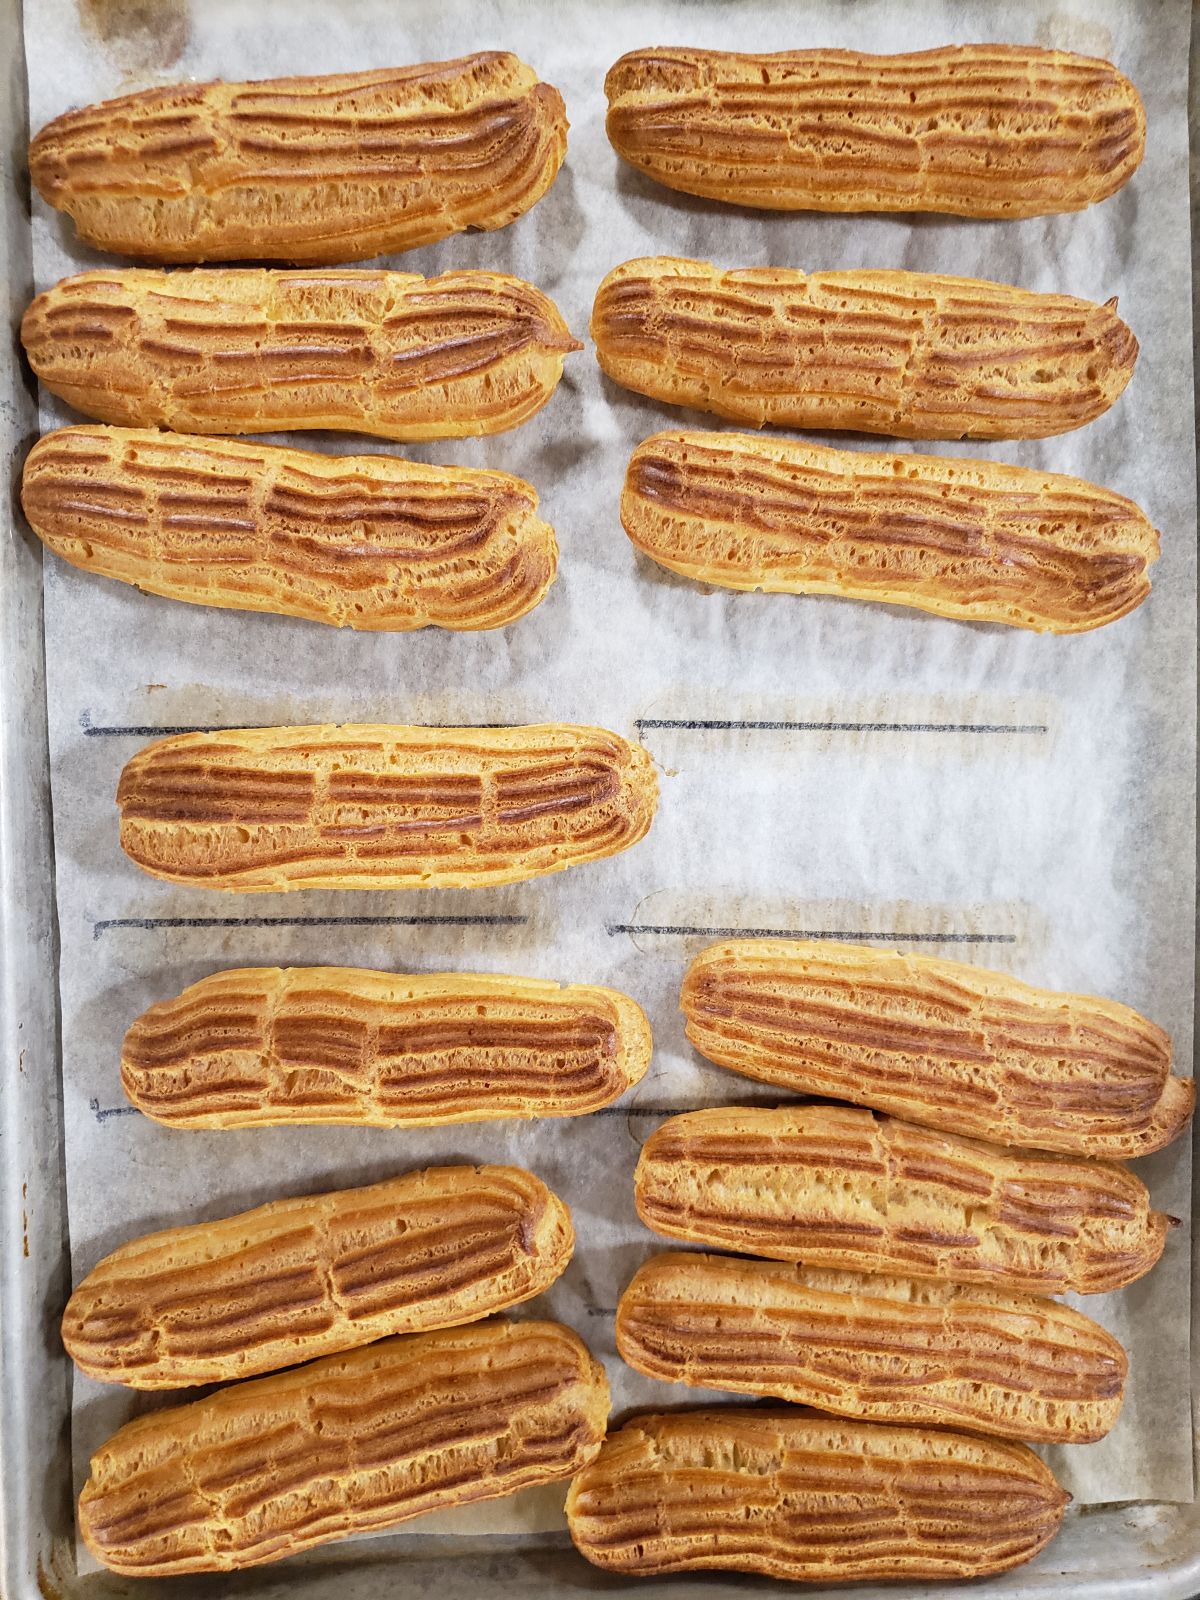 How to Make Eclairs: Temps for Pastry custard and Baking